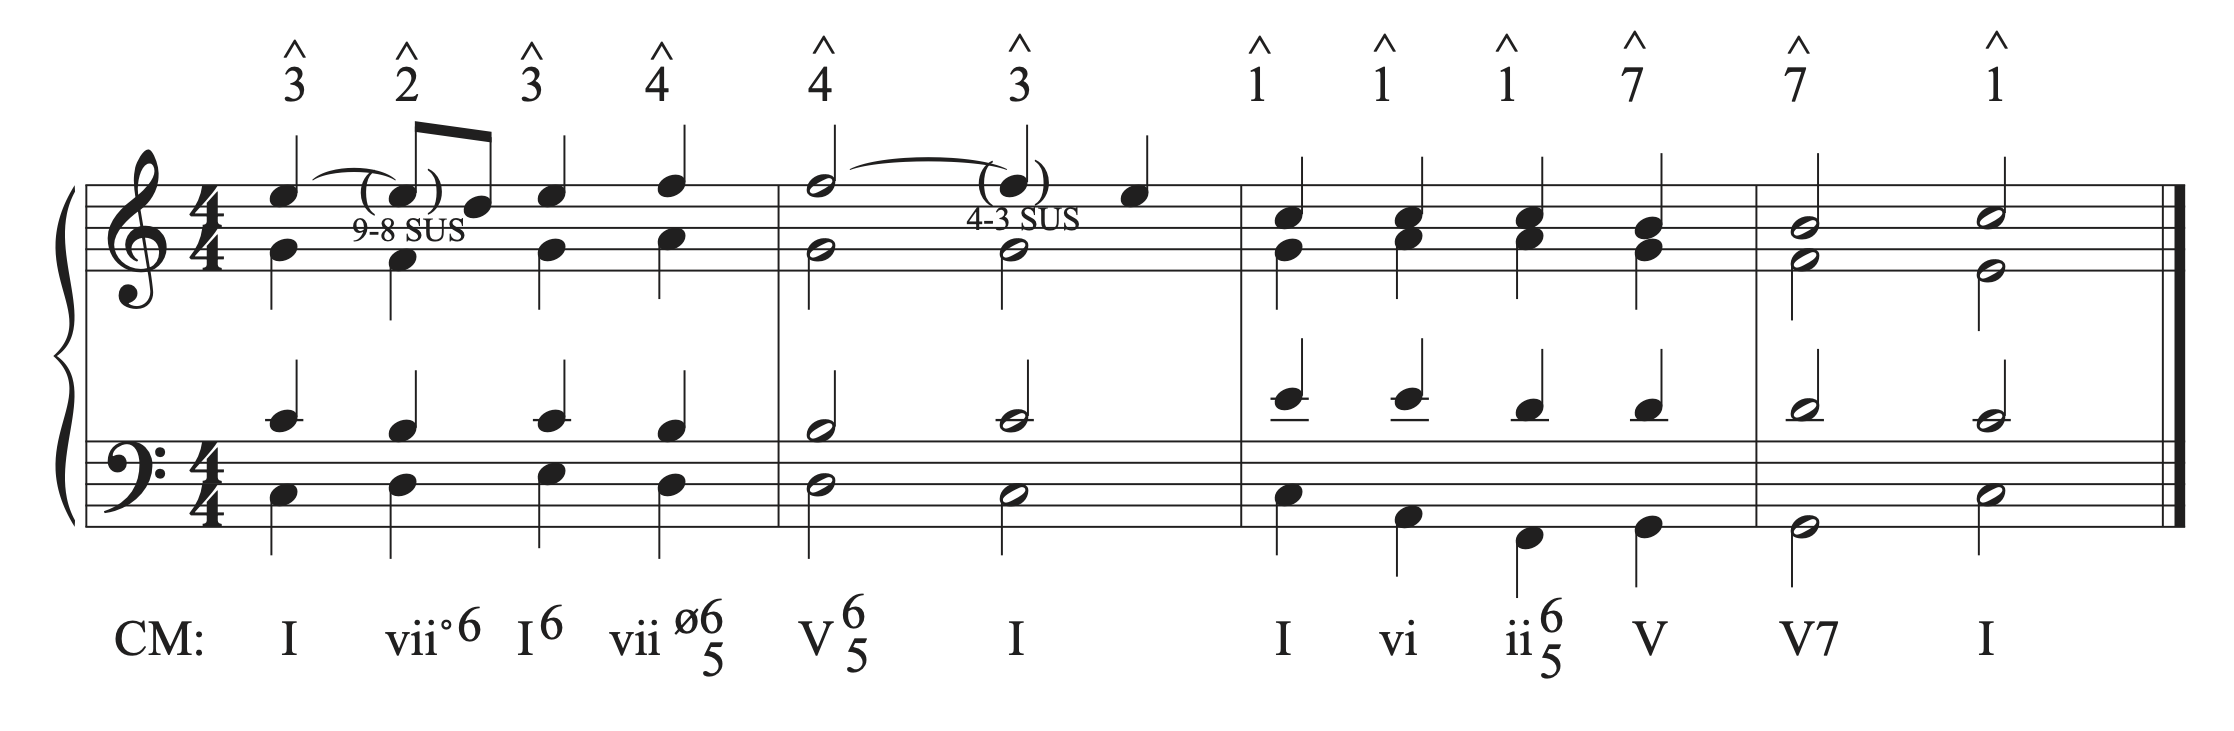 The musical example in C major with a 4-3 suspension added.